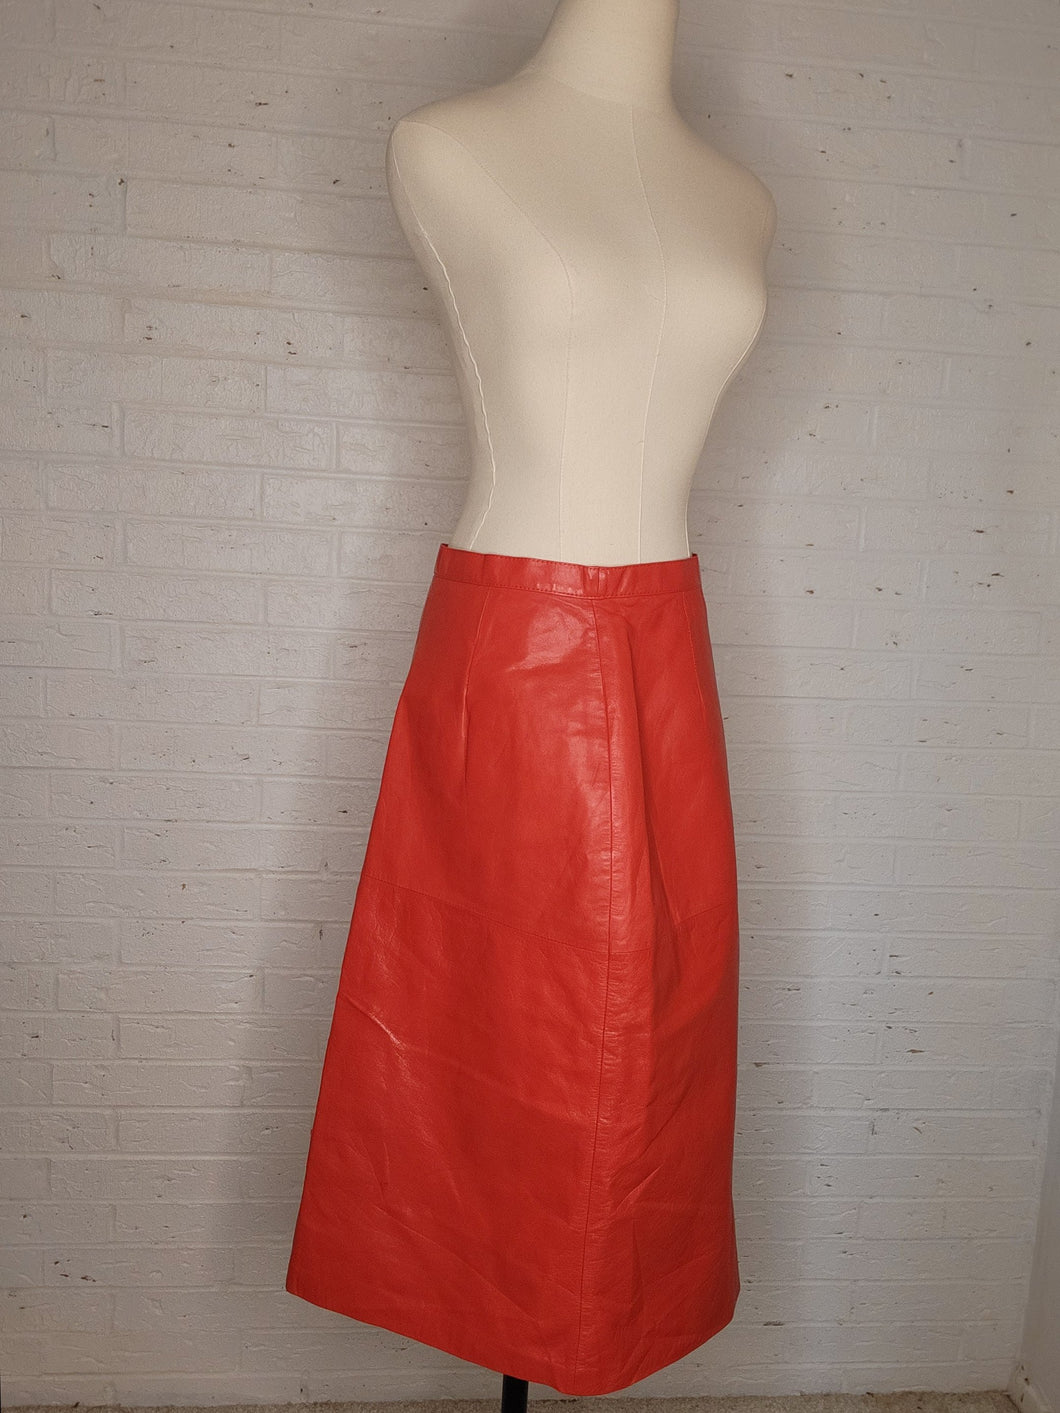 M - Vintage Red Leather Skirt